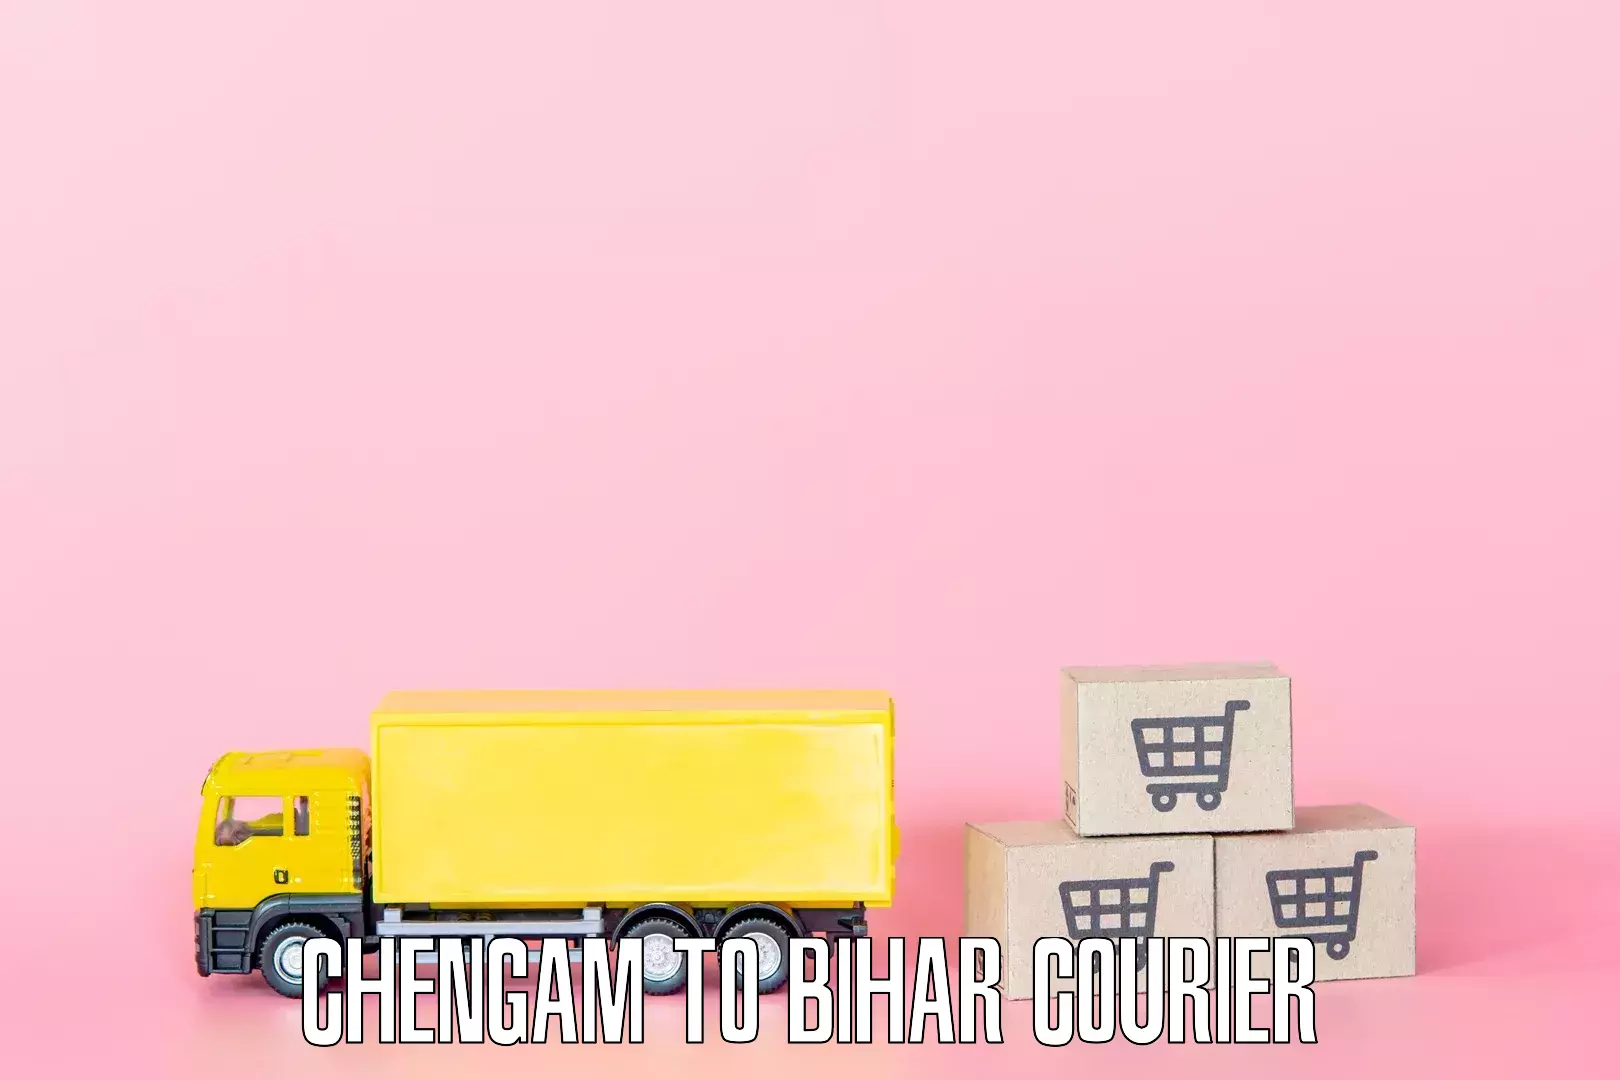 Moving and packing experts Chengam to Bihar